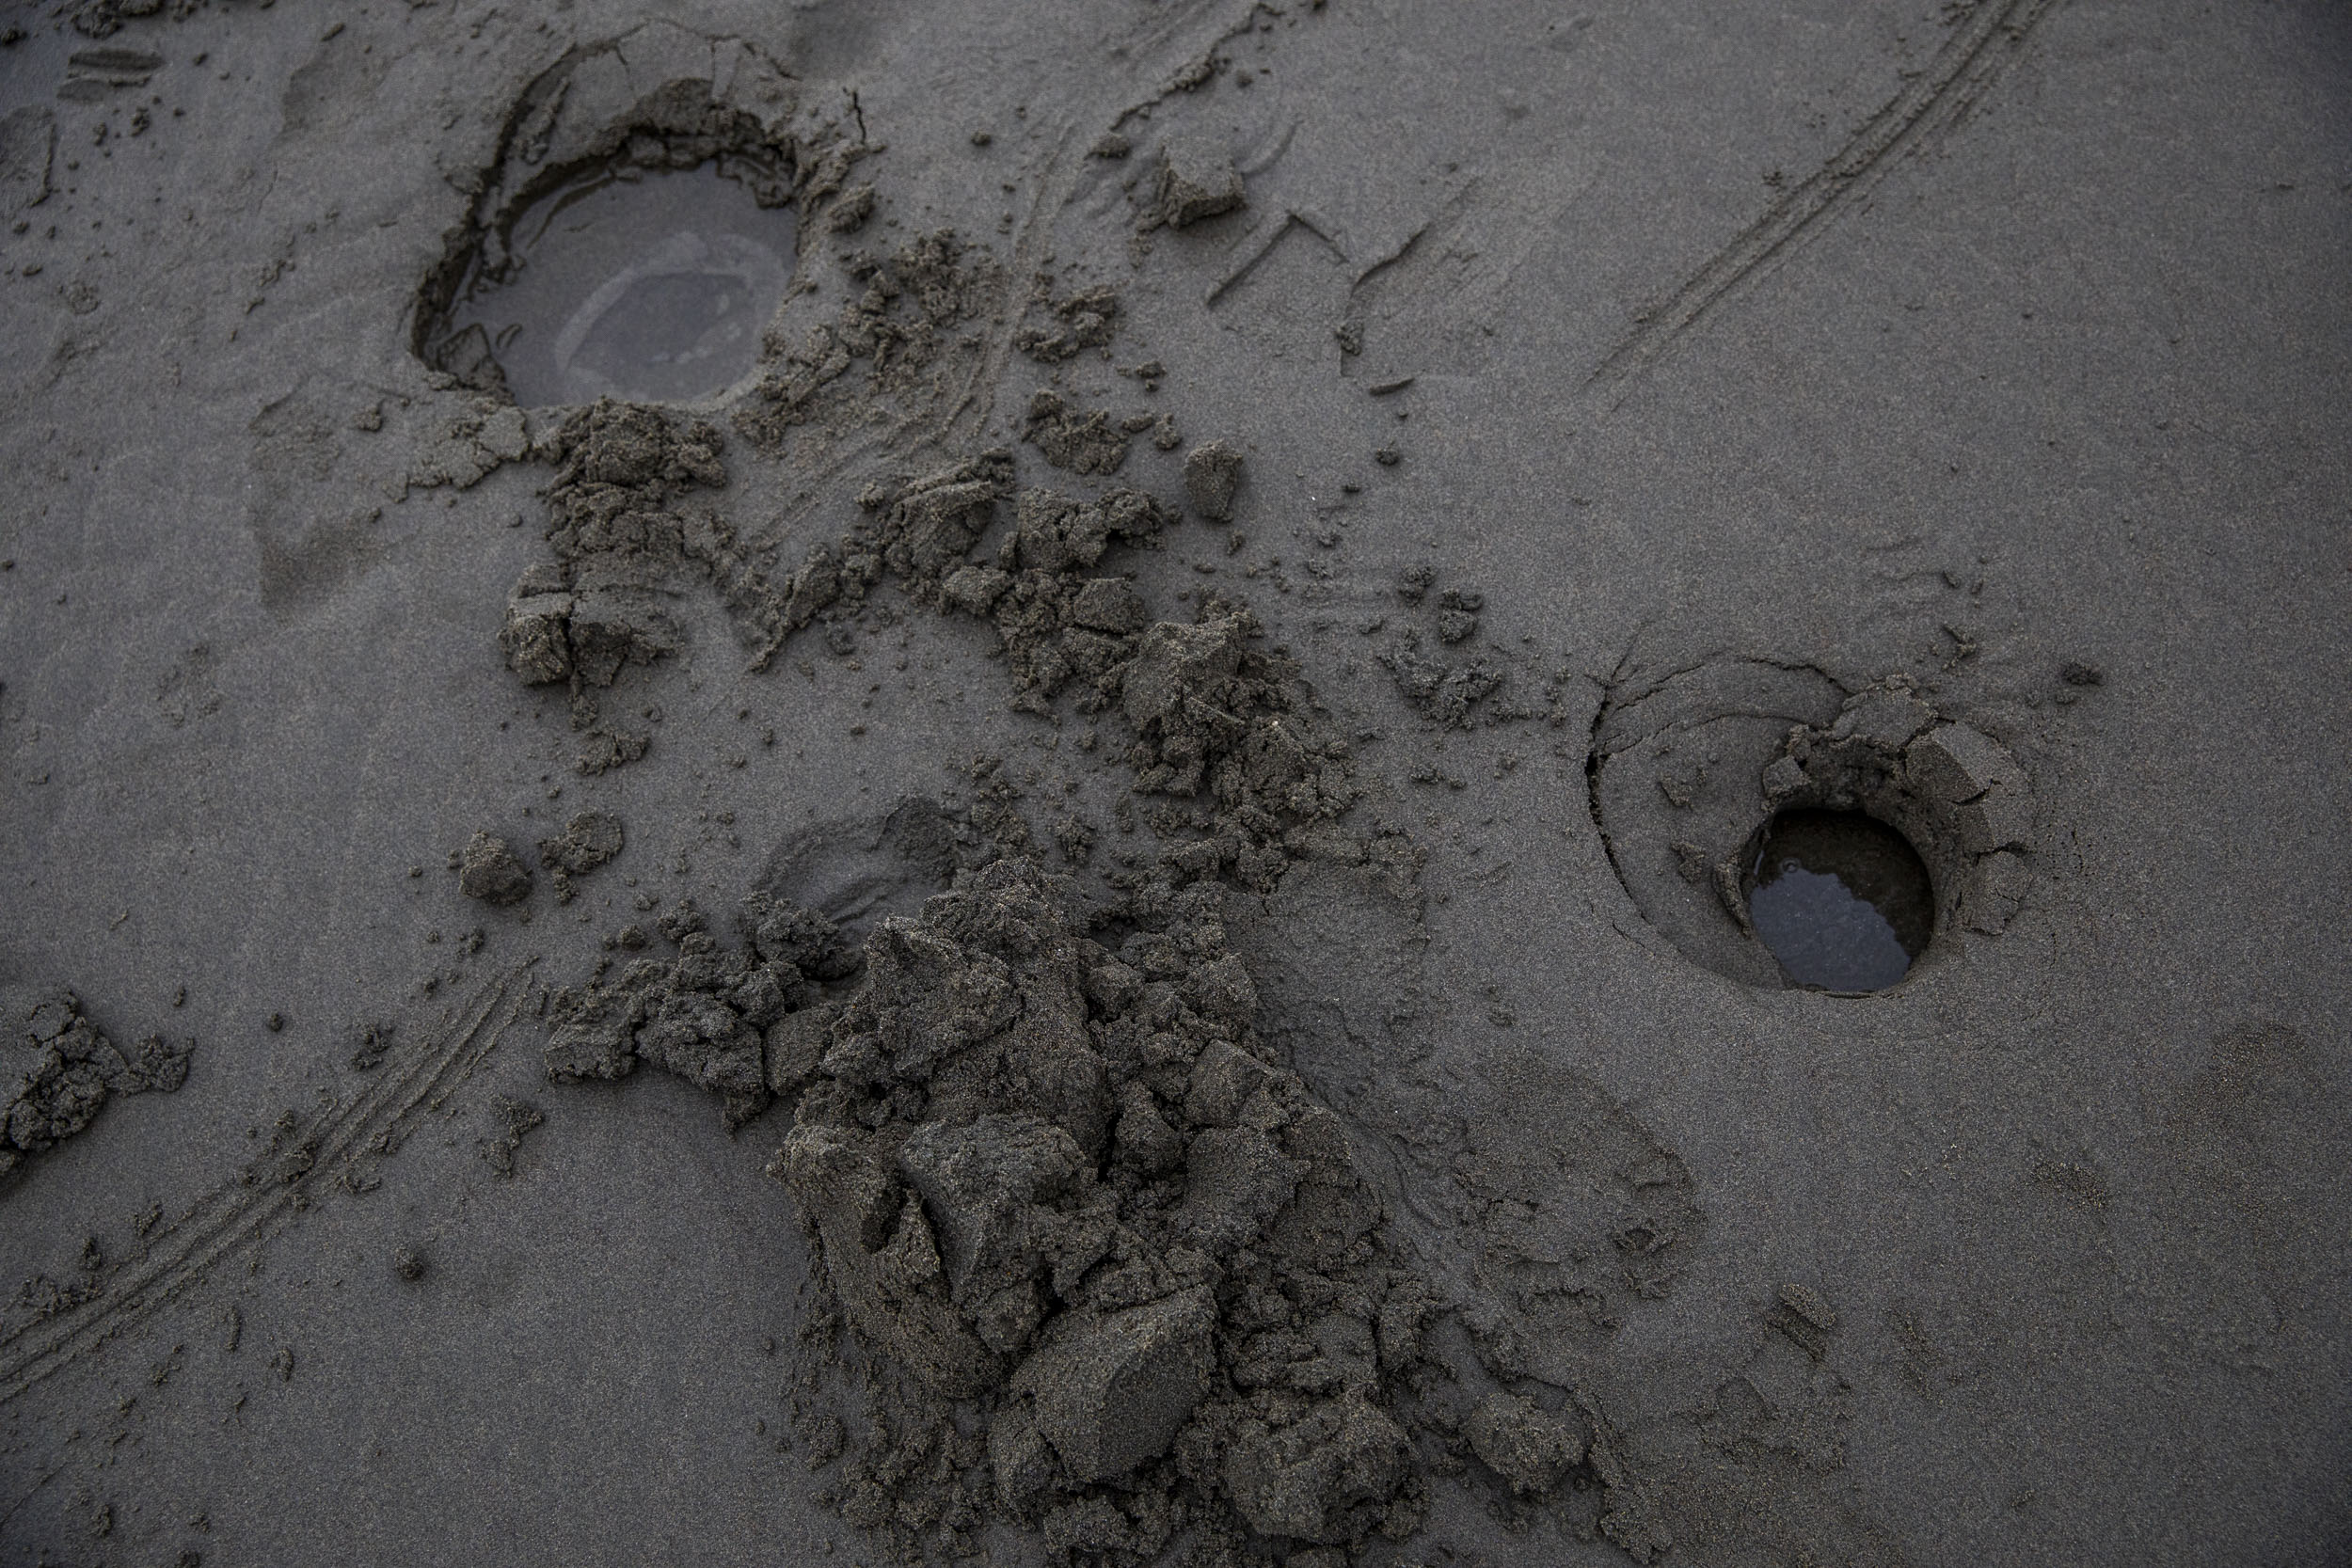 Holes are left in the sand from clam guns and shovels during a razor clam dig at Grayland Beach State Park in Grayland, Wash. on Wednesday, Jan. 2, 2019.